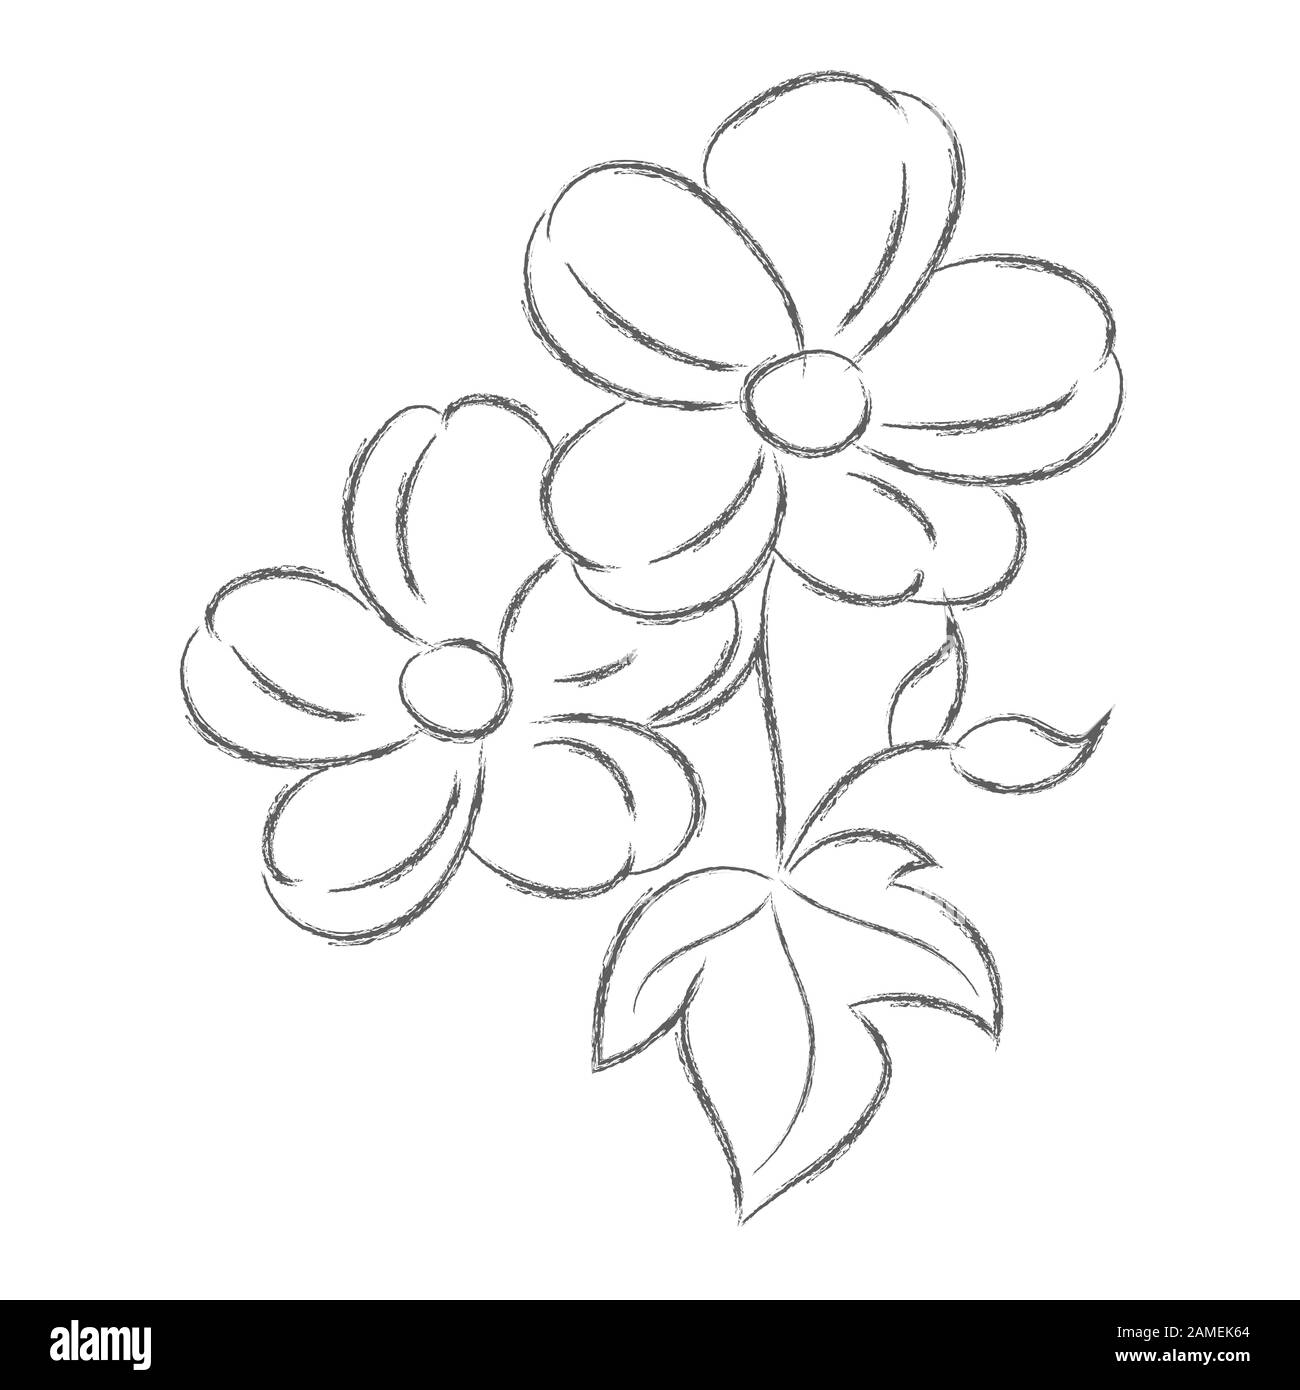 22 Flower Clipart Black and White! - The Graphics Fairy